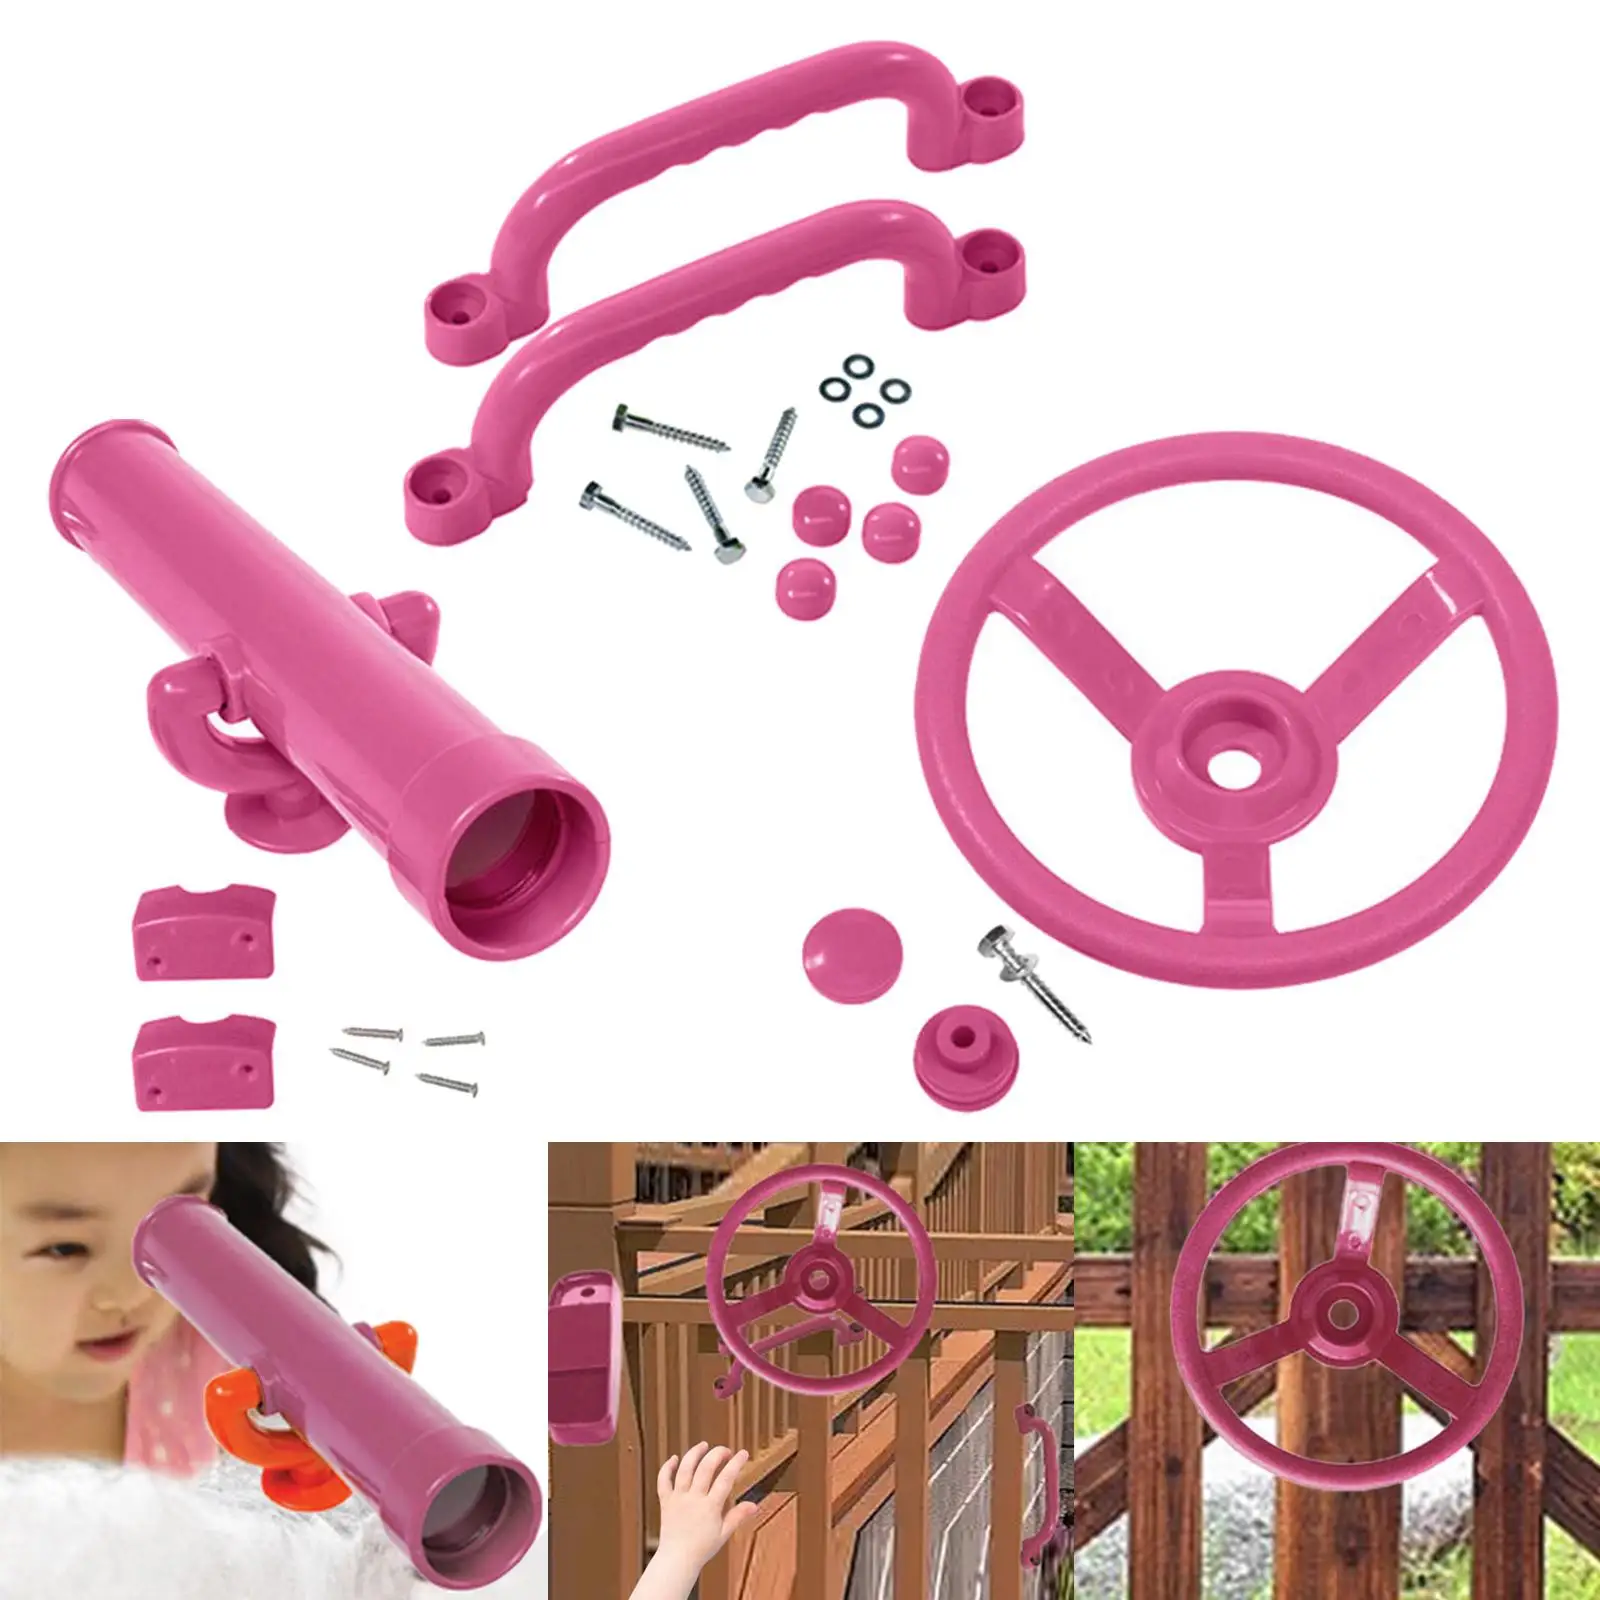 Playground Equipment Swingset Attachments Valentines Day Gifts for Playhouse Treehouse Jungle Gym Climbing Frame Attachments